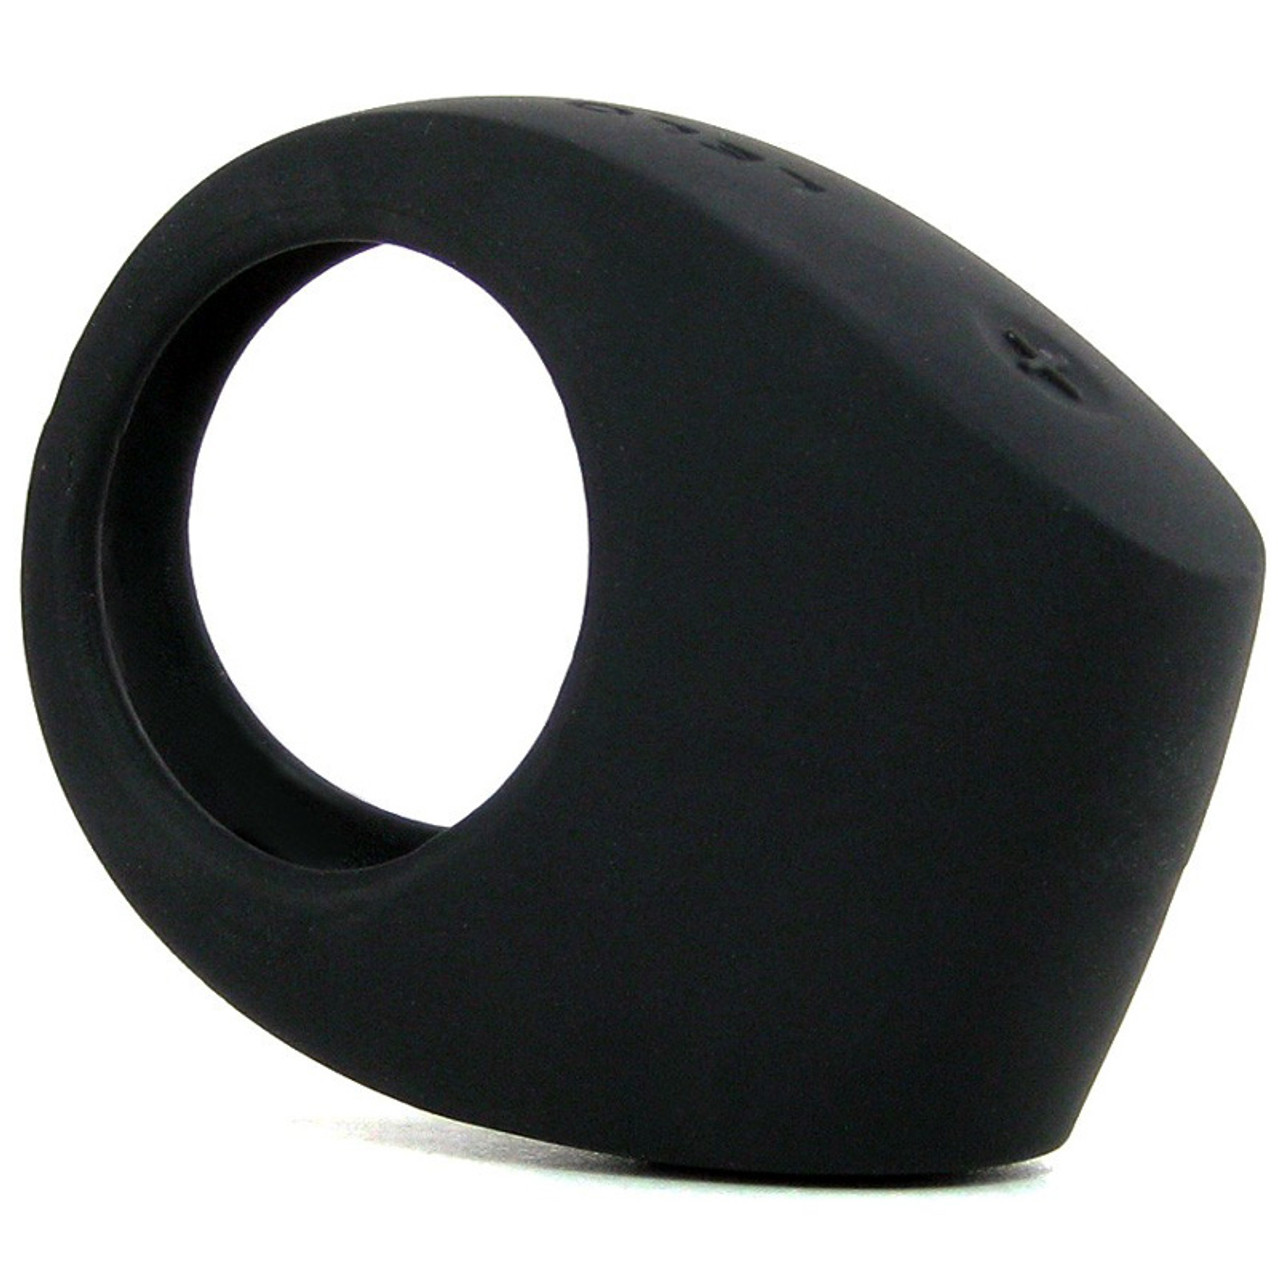  LELO TOR 2 Intimate Vibrating Cock Ring, Reusable Sex Toys for  Couples, Love-Ring with 29 mm / 1.1 in in diameter for More Bedroom Fun,  Black : Health & Household